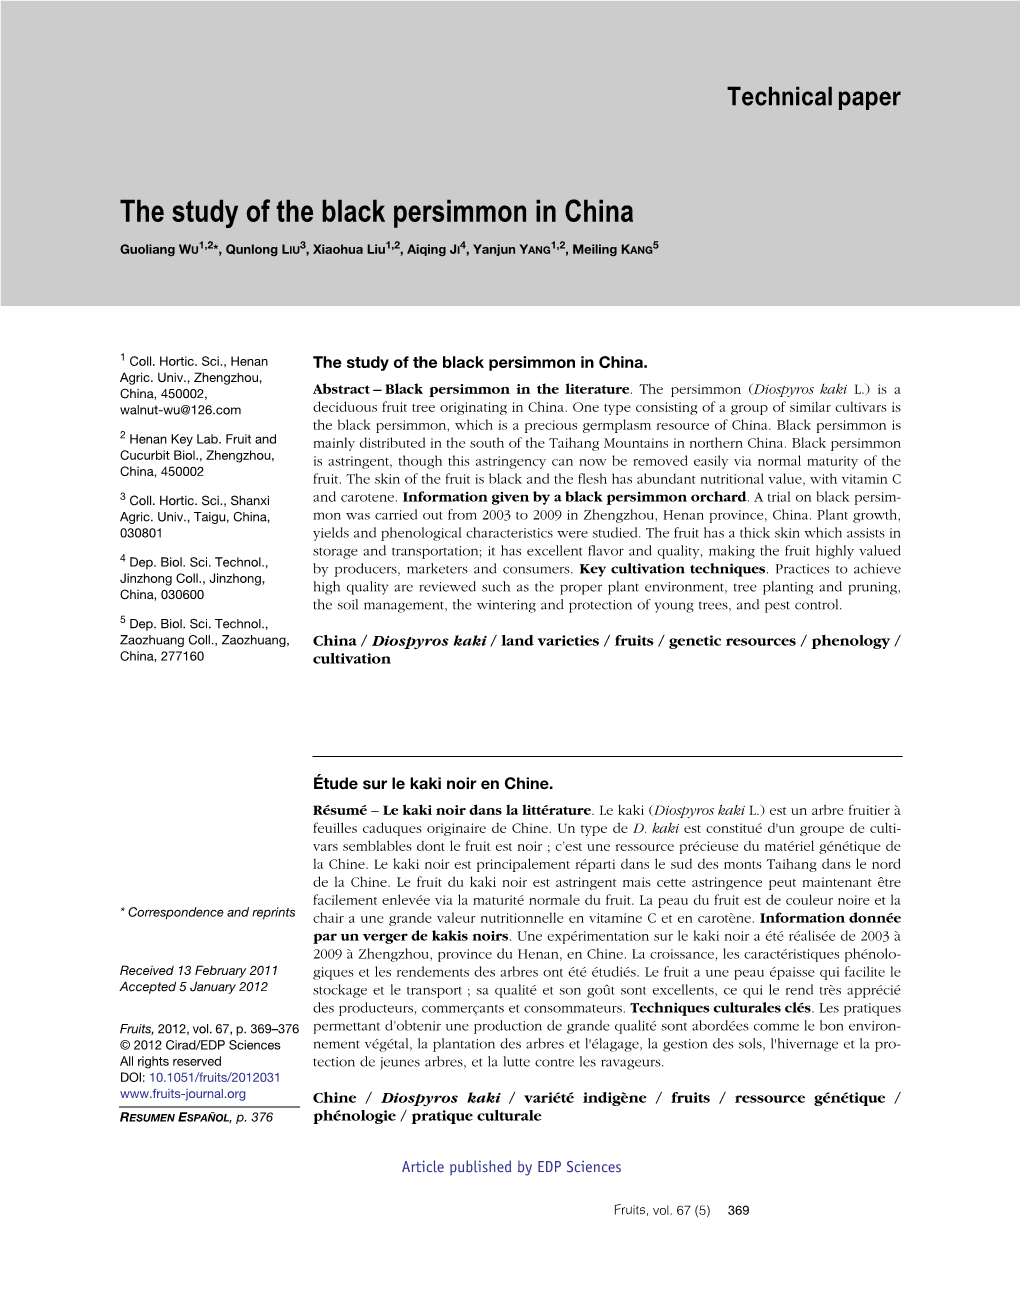 The Study of the Black Persimmon in China